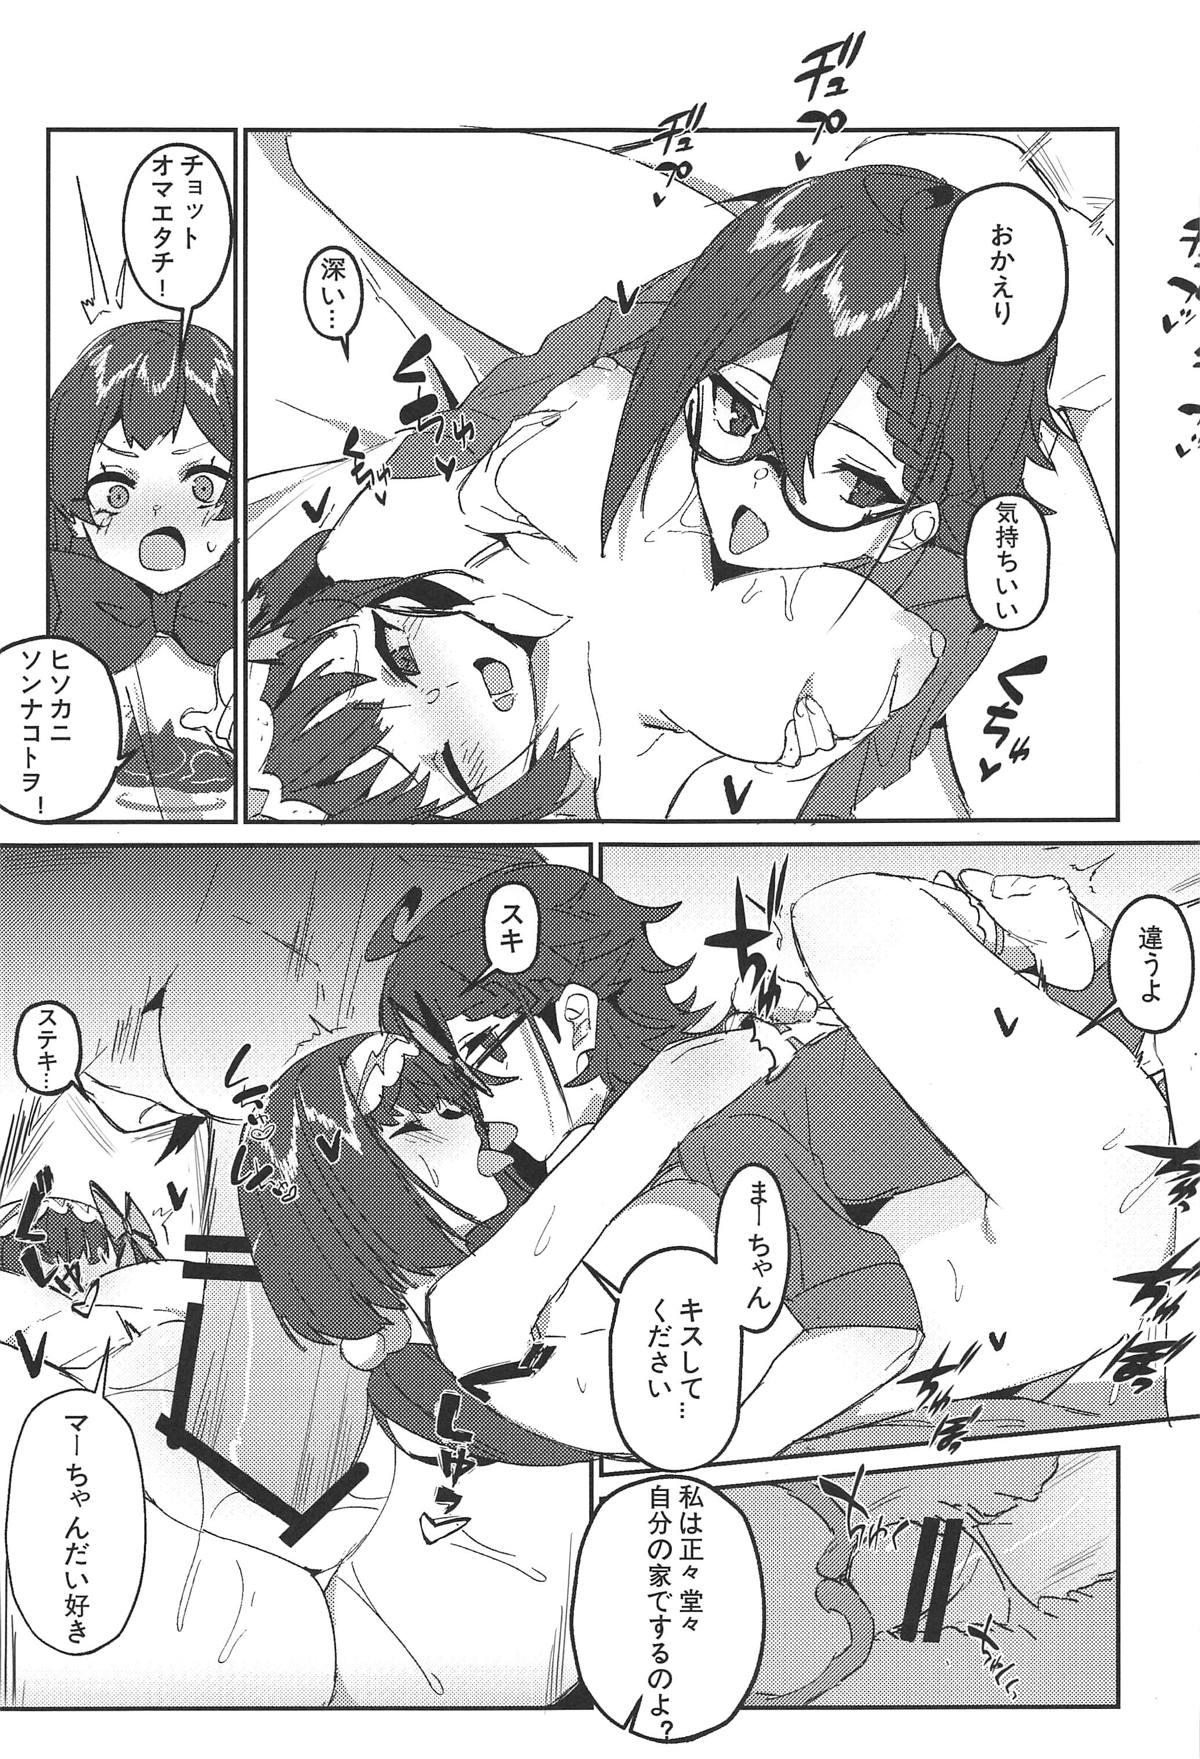 Peeing change daily 1 - Kantai collection Fate grand order Outside - Page 10